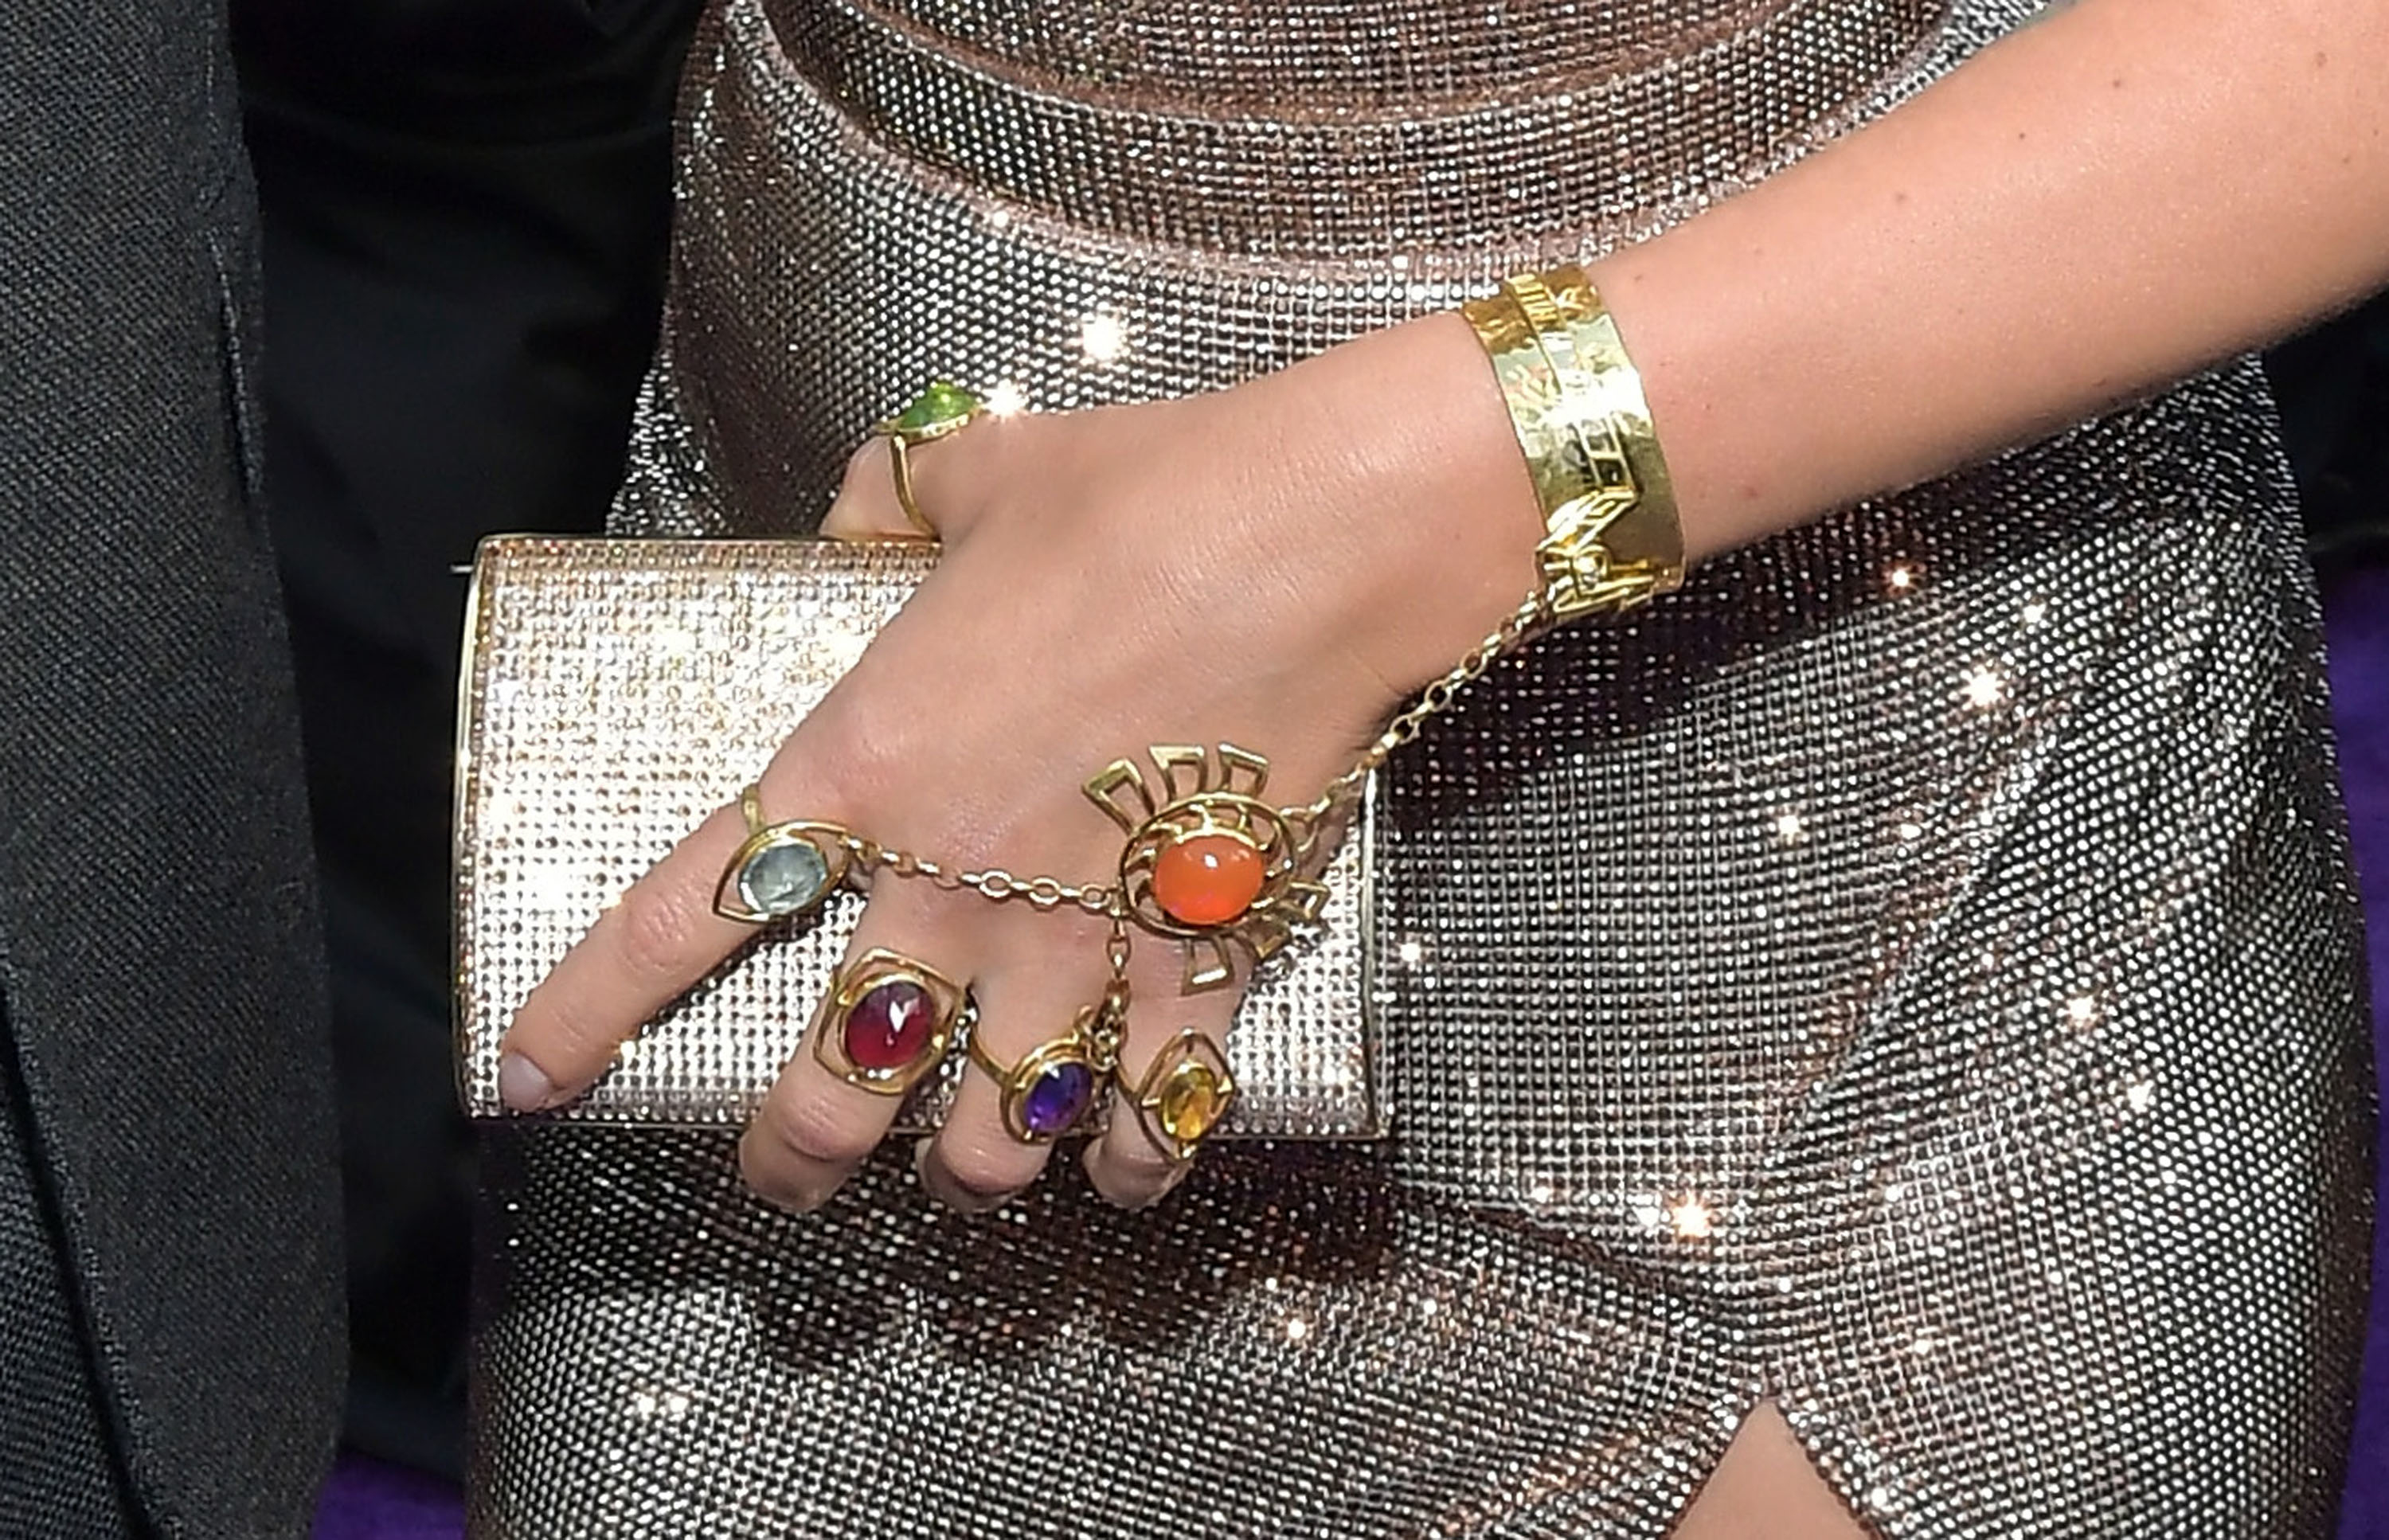 Close-up of a person&#x27;s adorned hand with a sparkling clutch, gold bracelet, and colorful rings